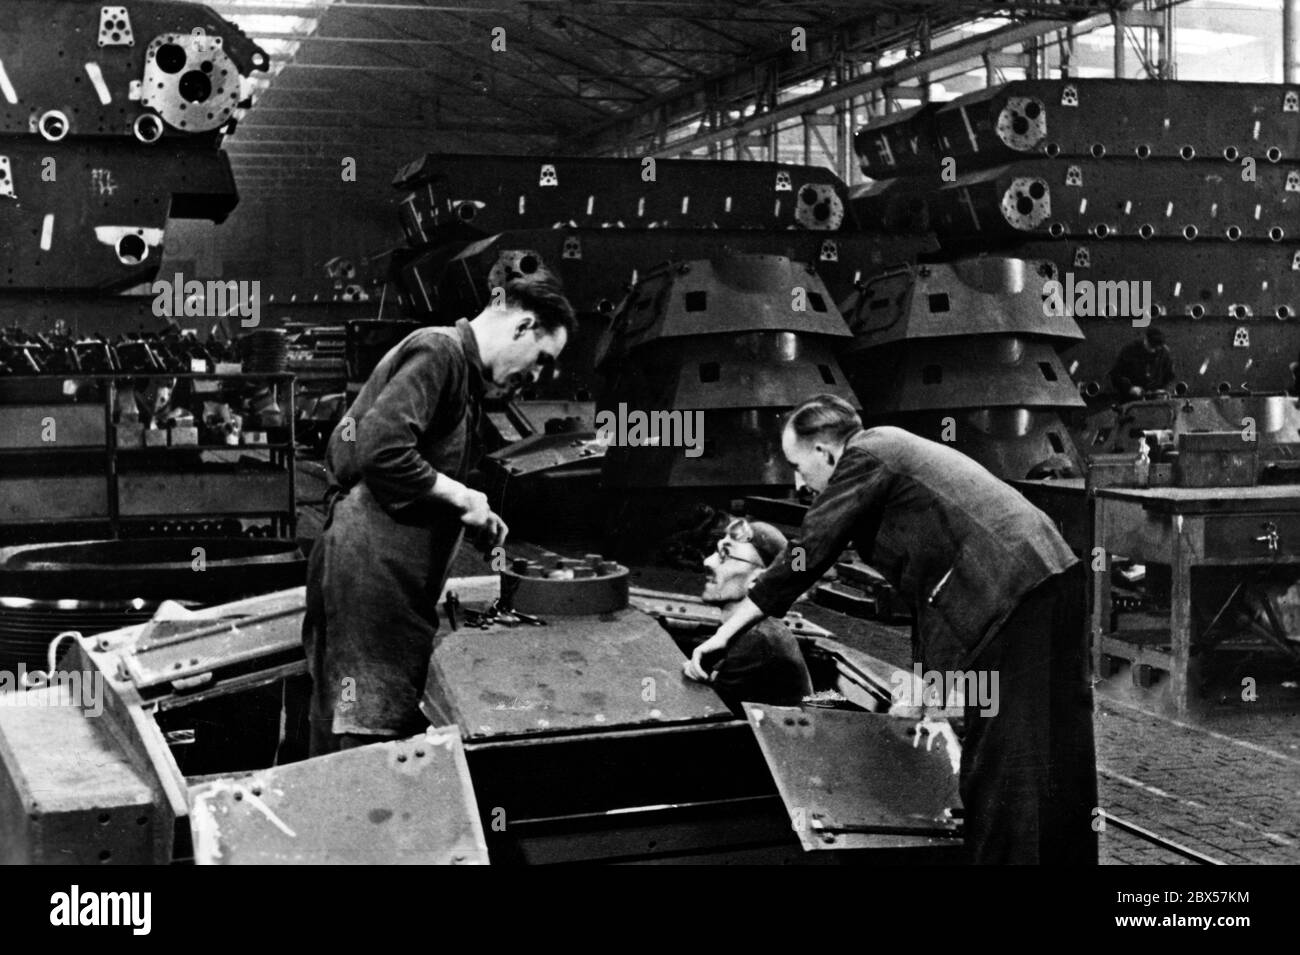 Employees of Rheinmetall manufacture a tank turret, in the background, tanks and turrets are piled up ready for the next production stage. Stock Photo